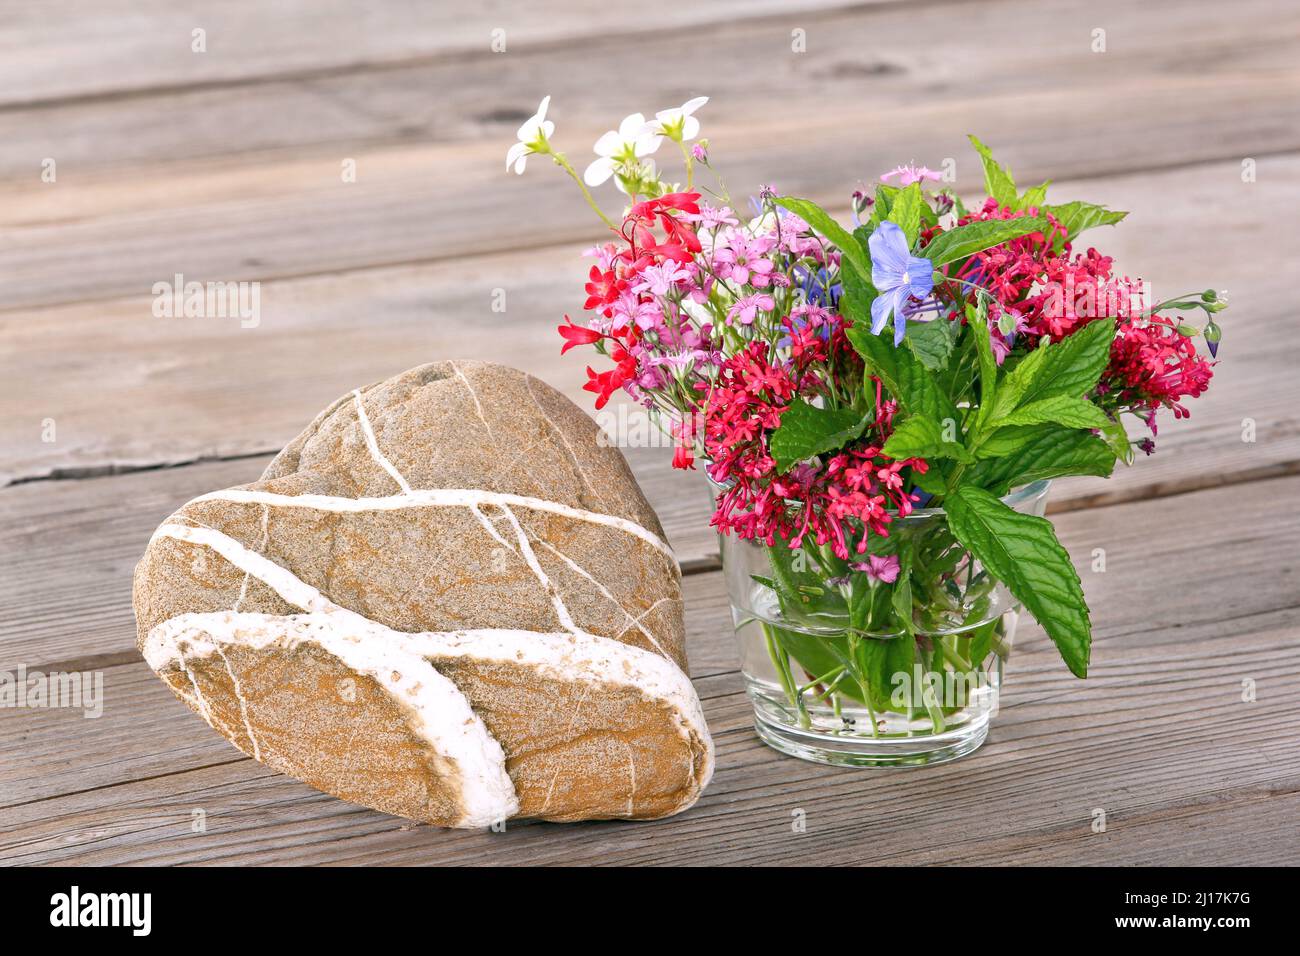 Heart-shaped stone with a small bouquet of flowers Stock Photo